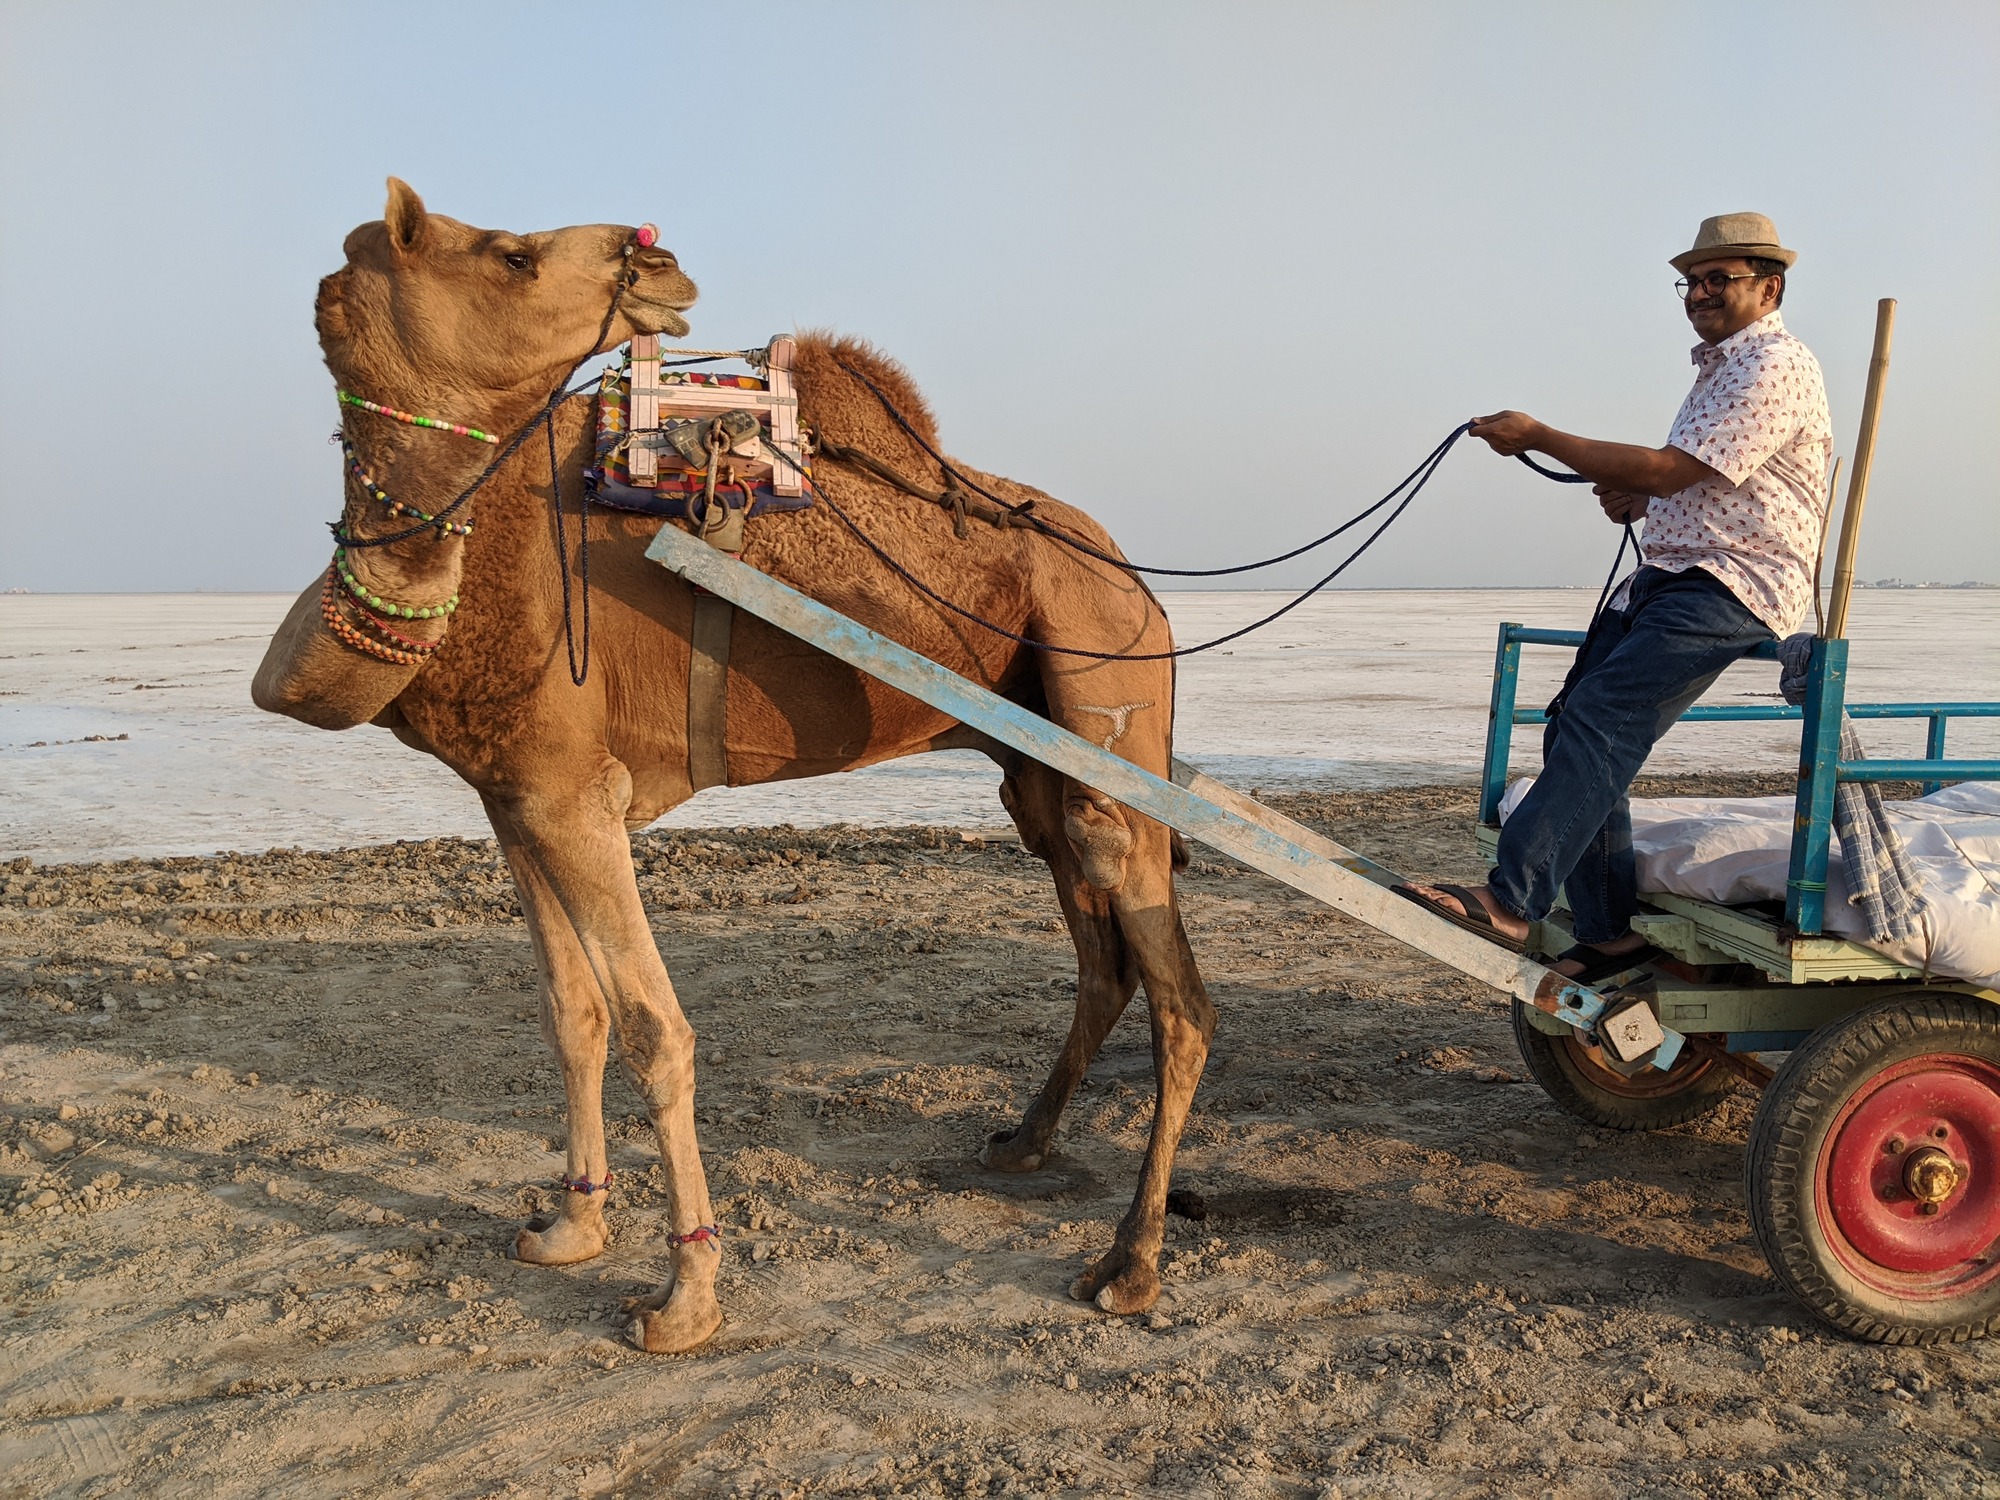 Trying my hand in driving a camel, who turned to instruct me 